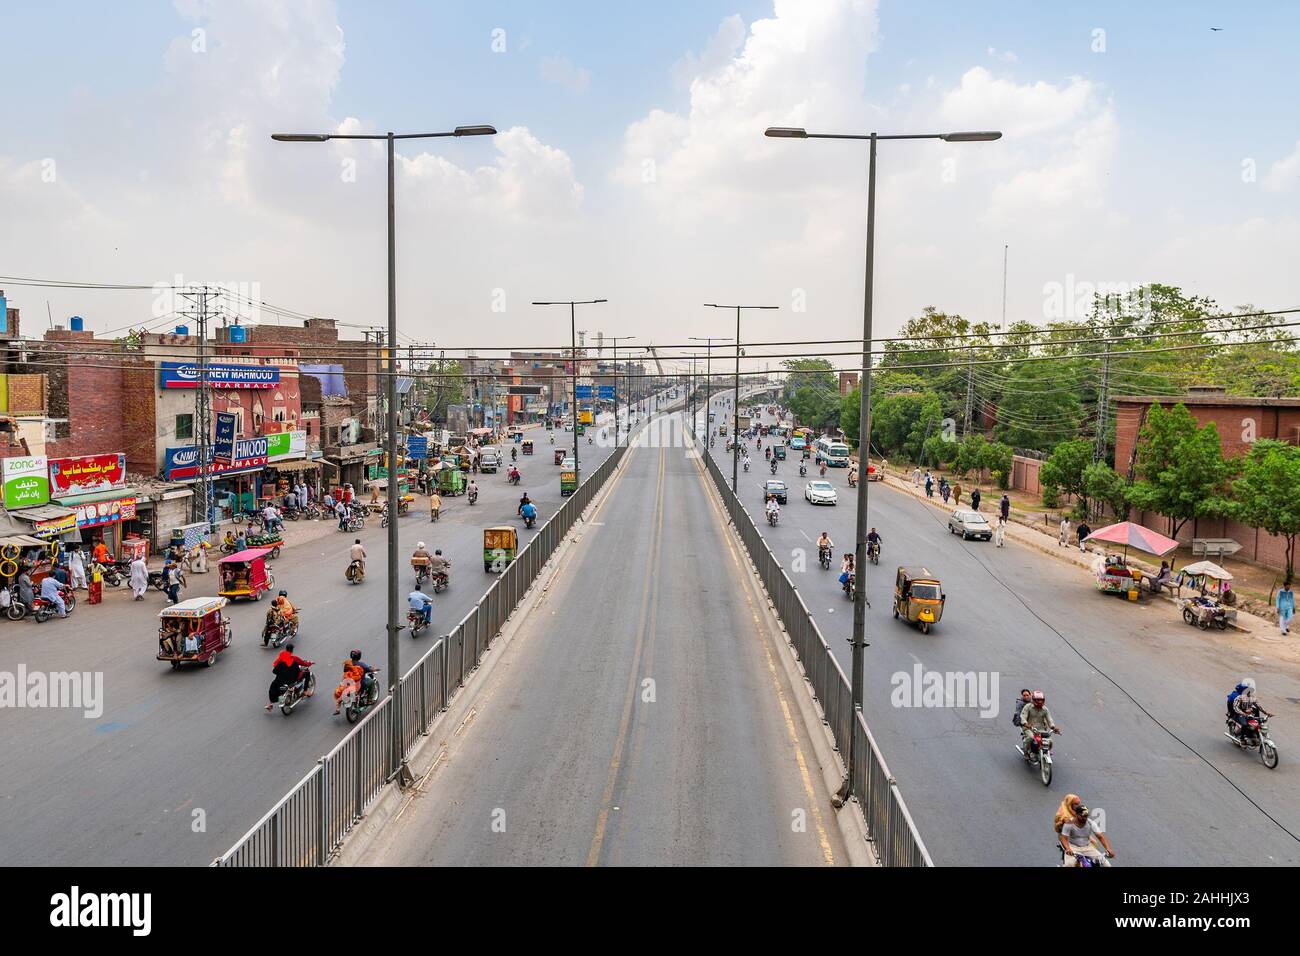 Lahore Data Darbar Road Picturesque View with Busy Traffic on a Cloudy Blue Sky Day Stock Photo